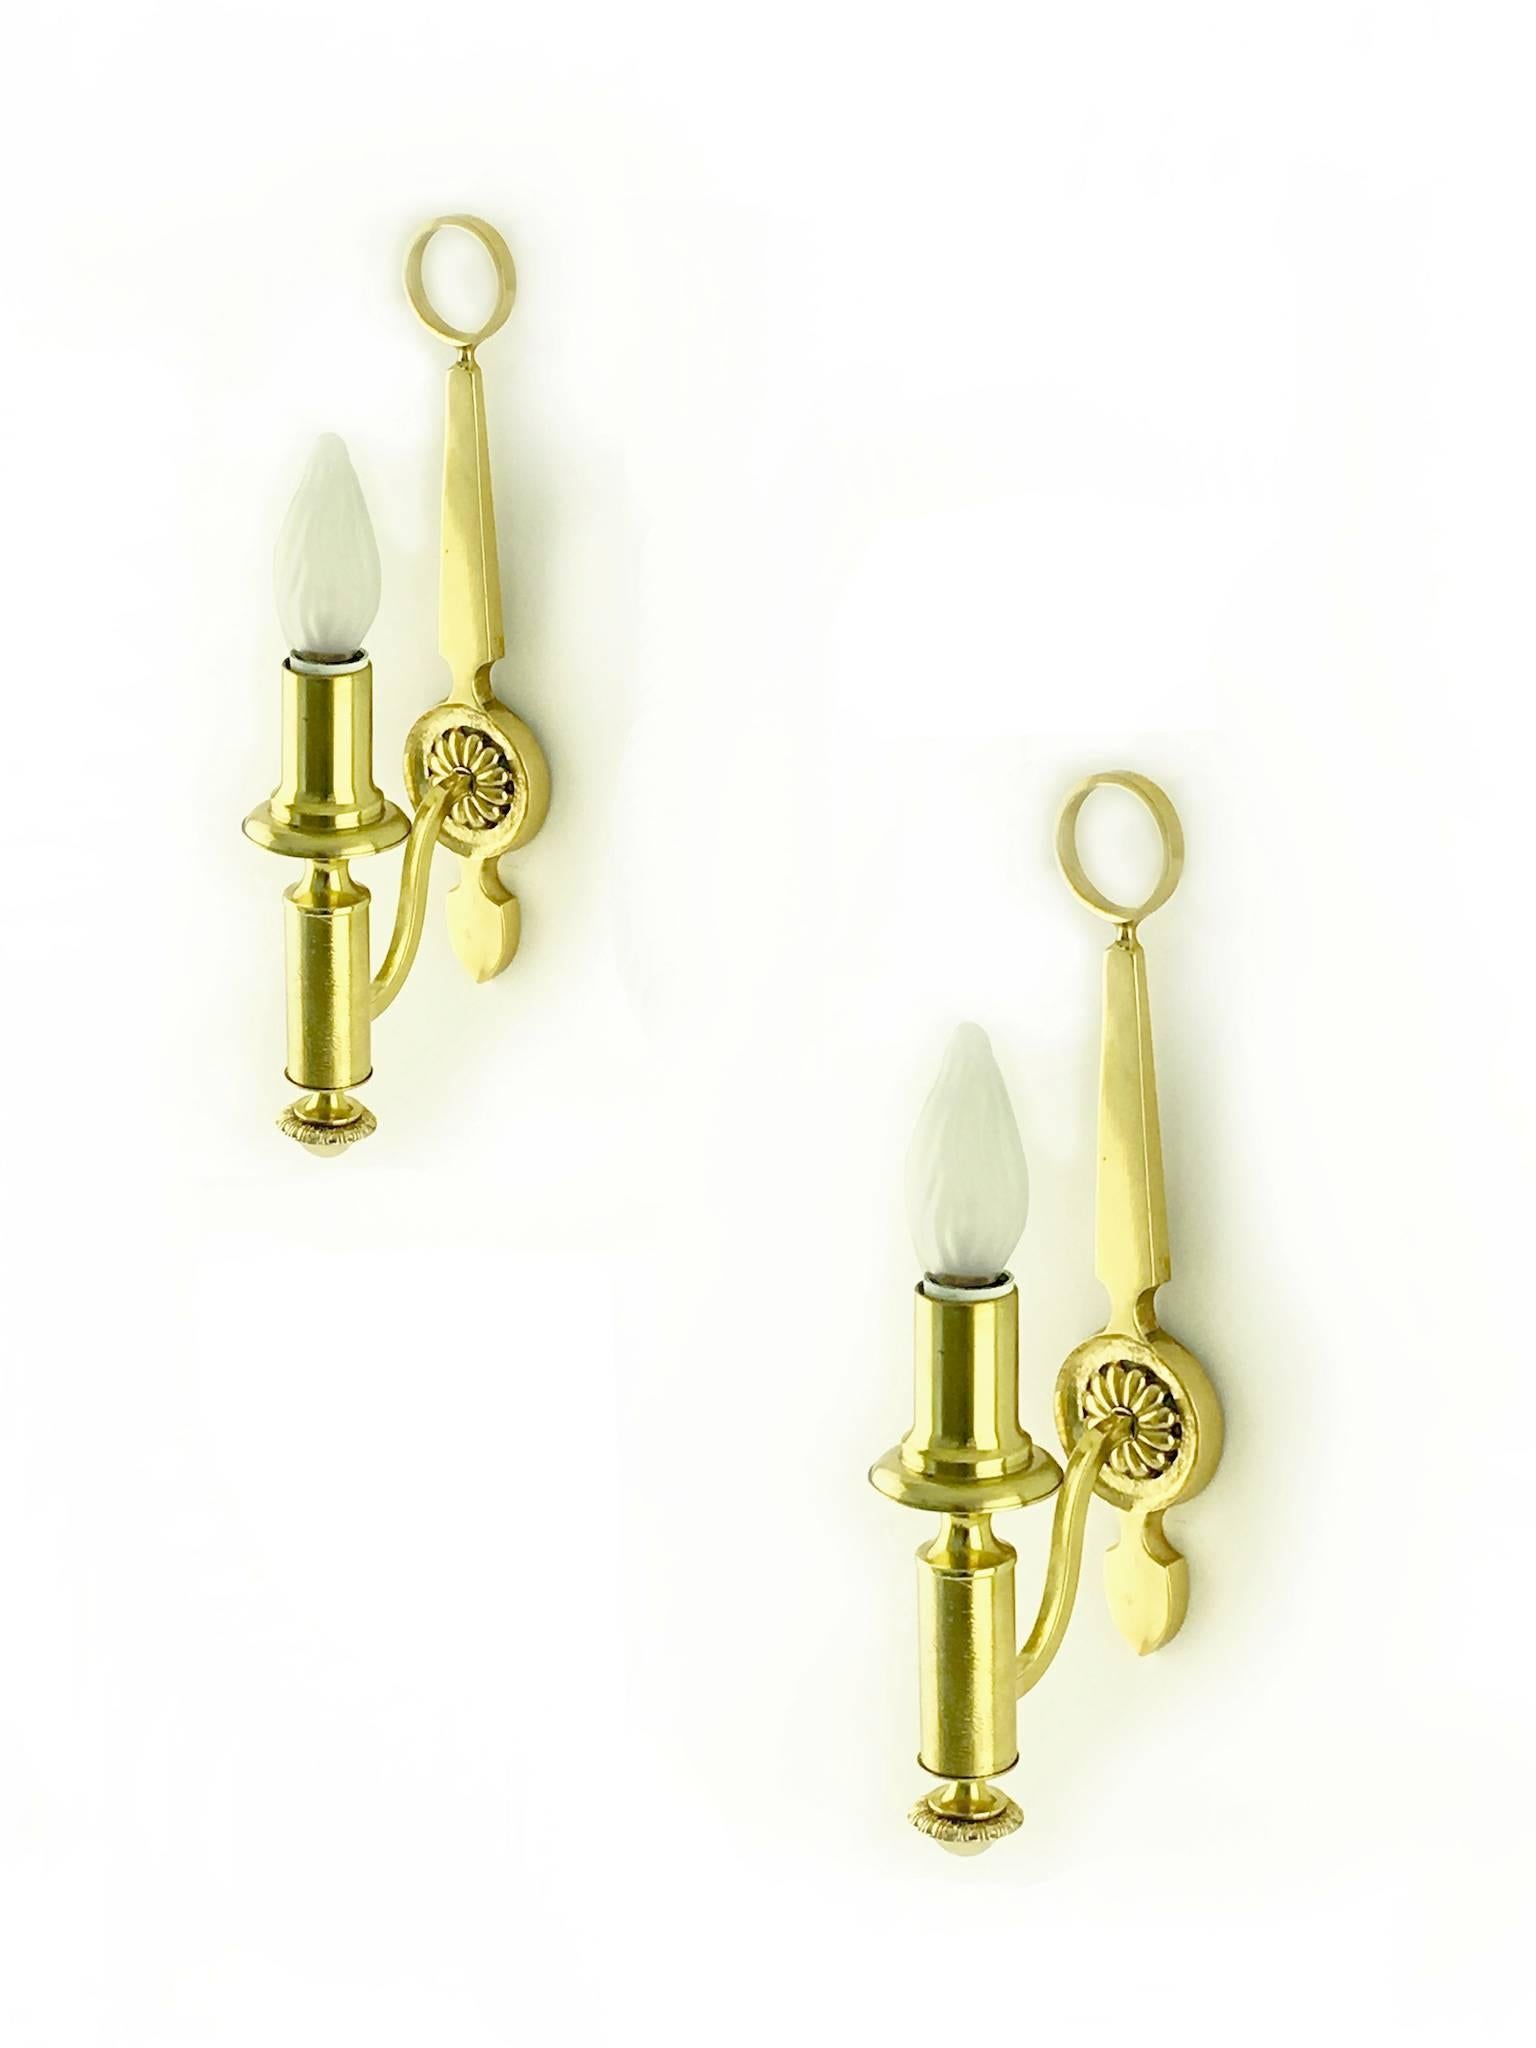 Pair of 1940-1950 neoclassical sconces in the manner of Maxime Old or Jacques Adnet.
SCONCES